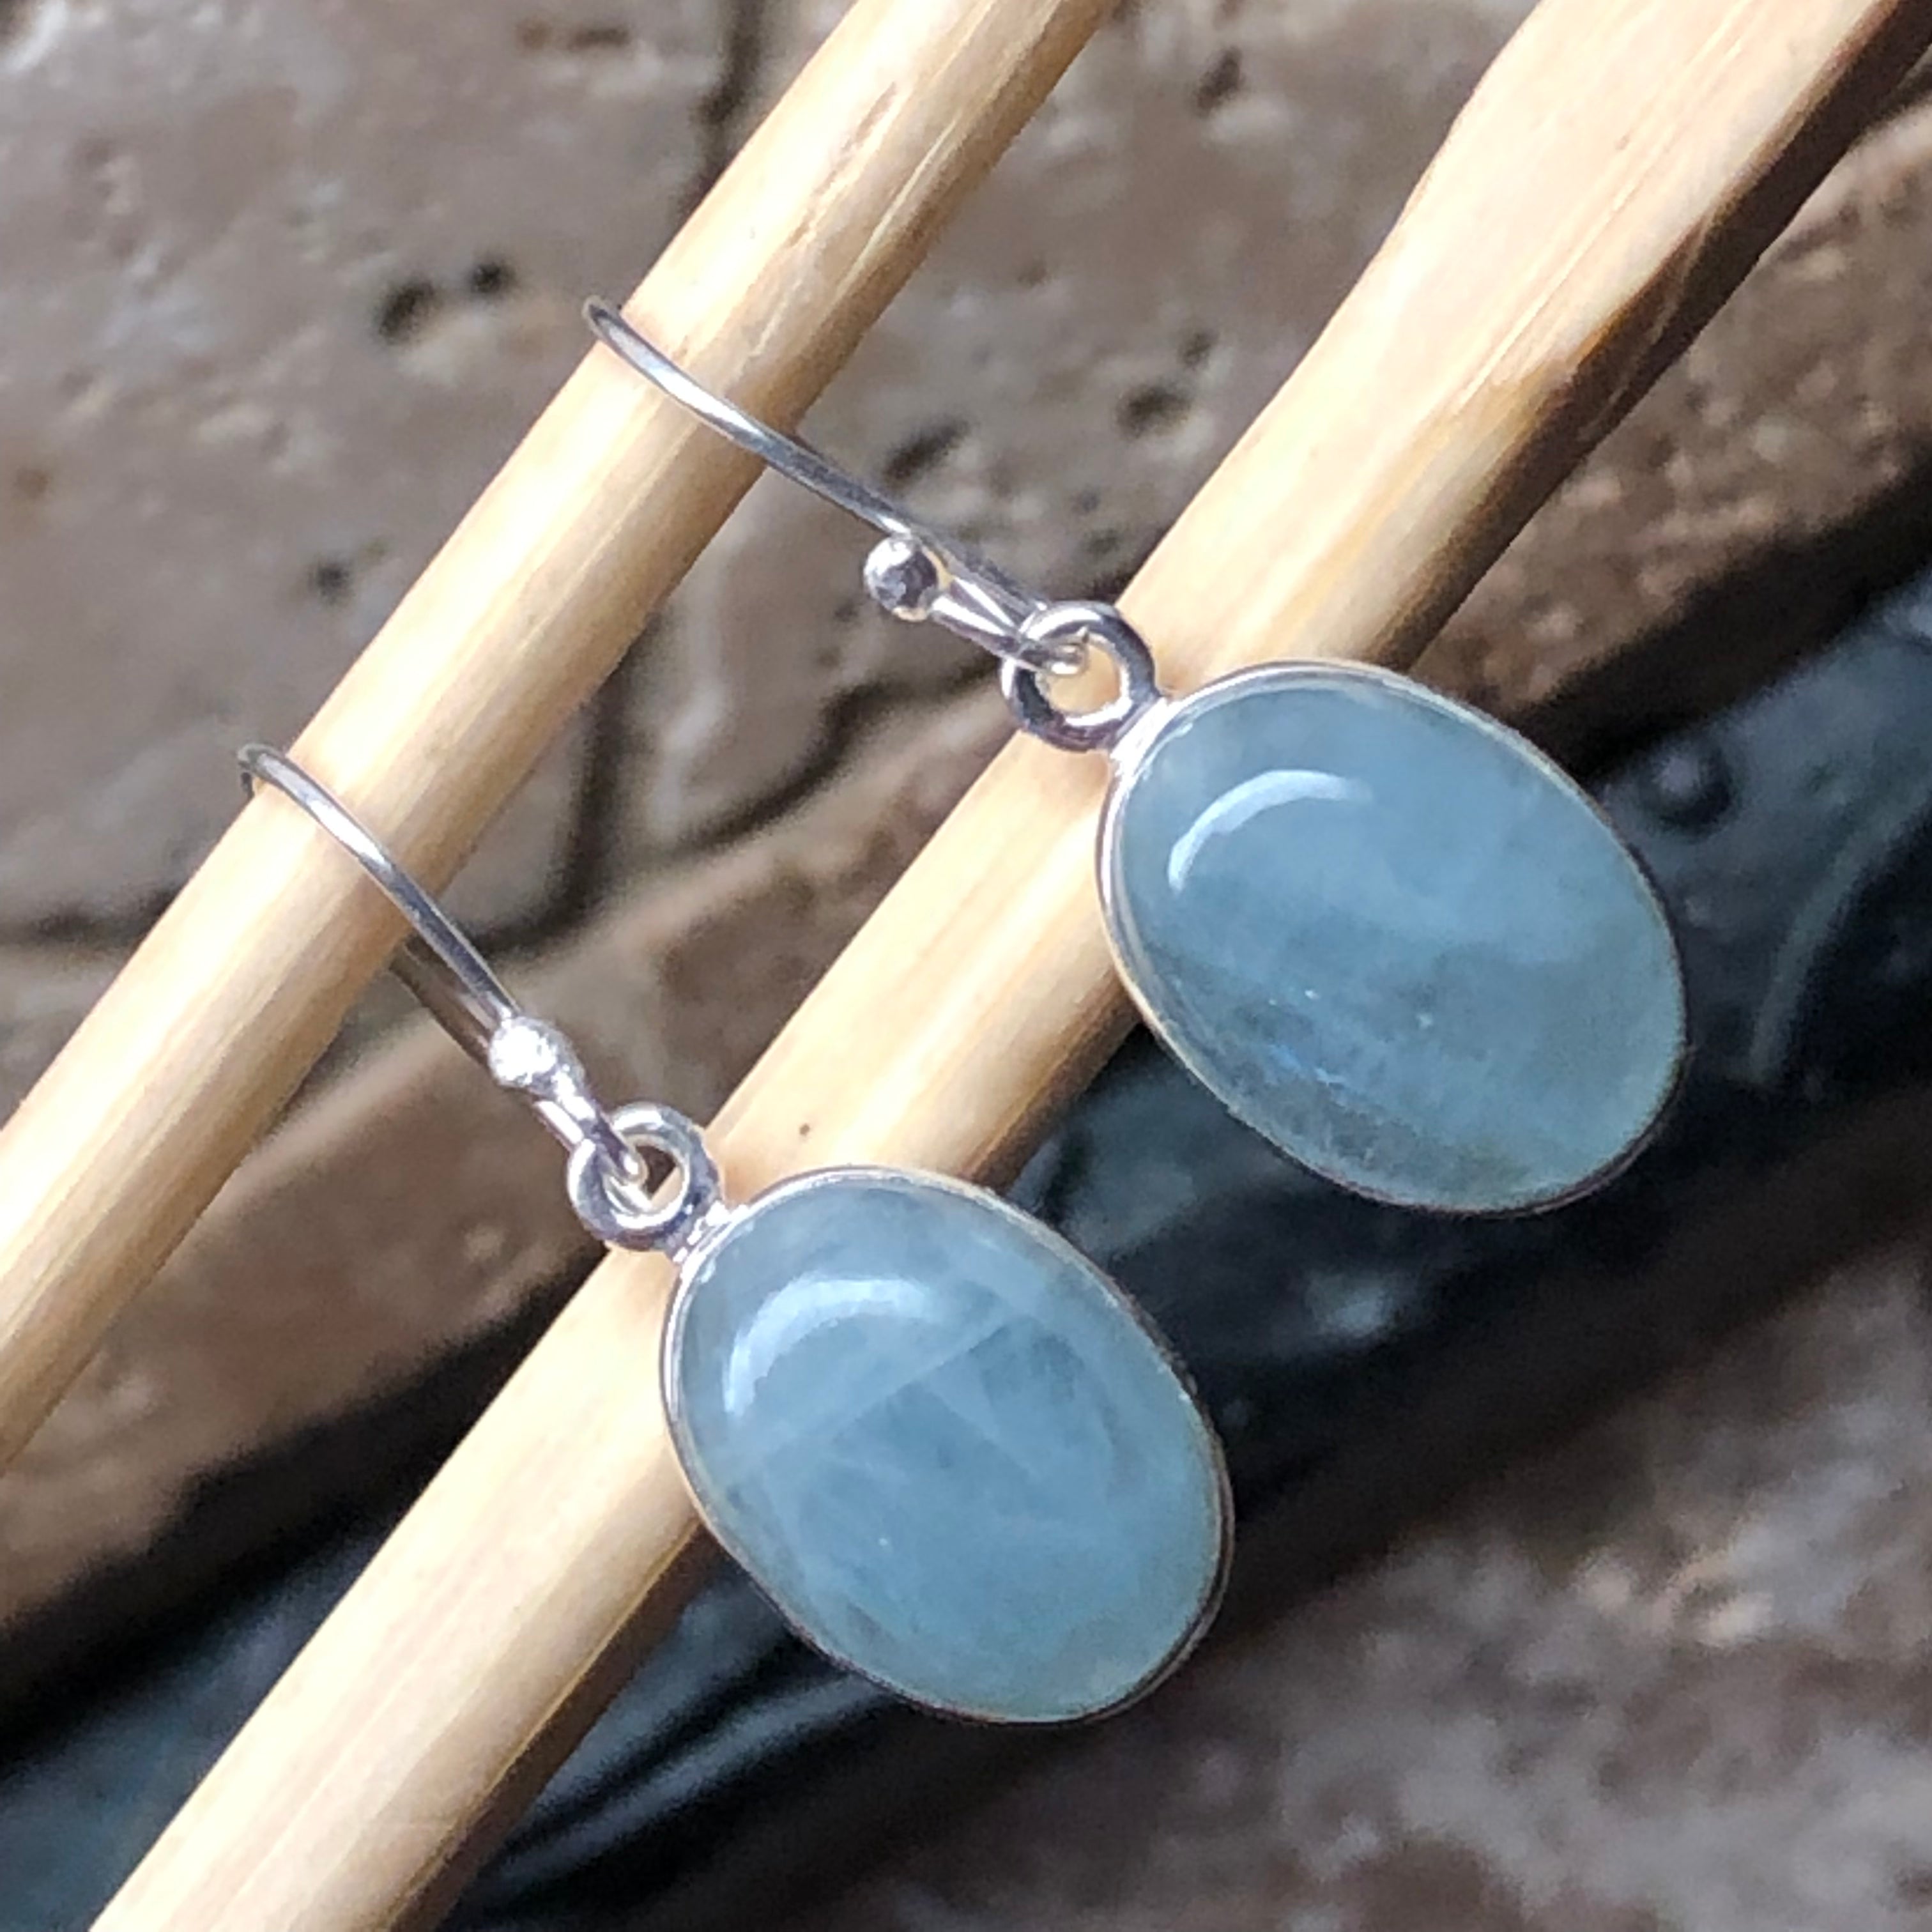 Natural Blue Aquamarine 925 Solid Sterling Silver Earrings 25mm - Natural Rocks by Kala